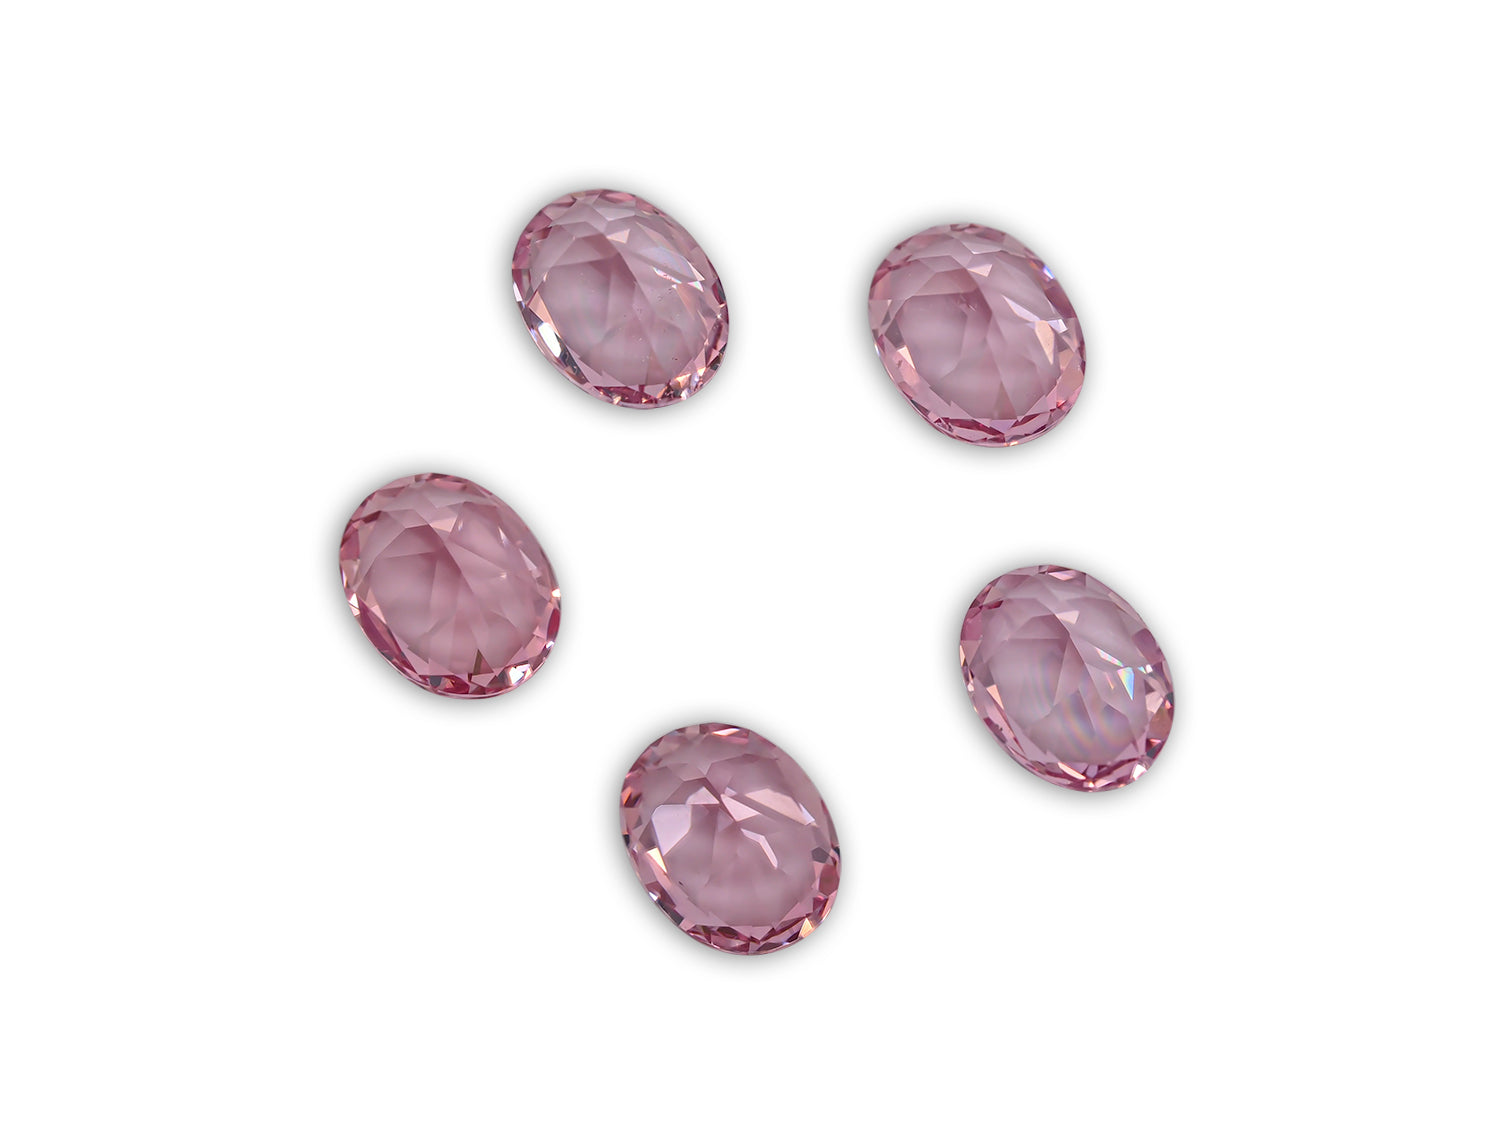 Neon Pink Spinel 3.14 CT / 5